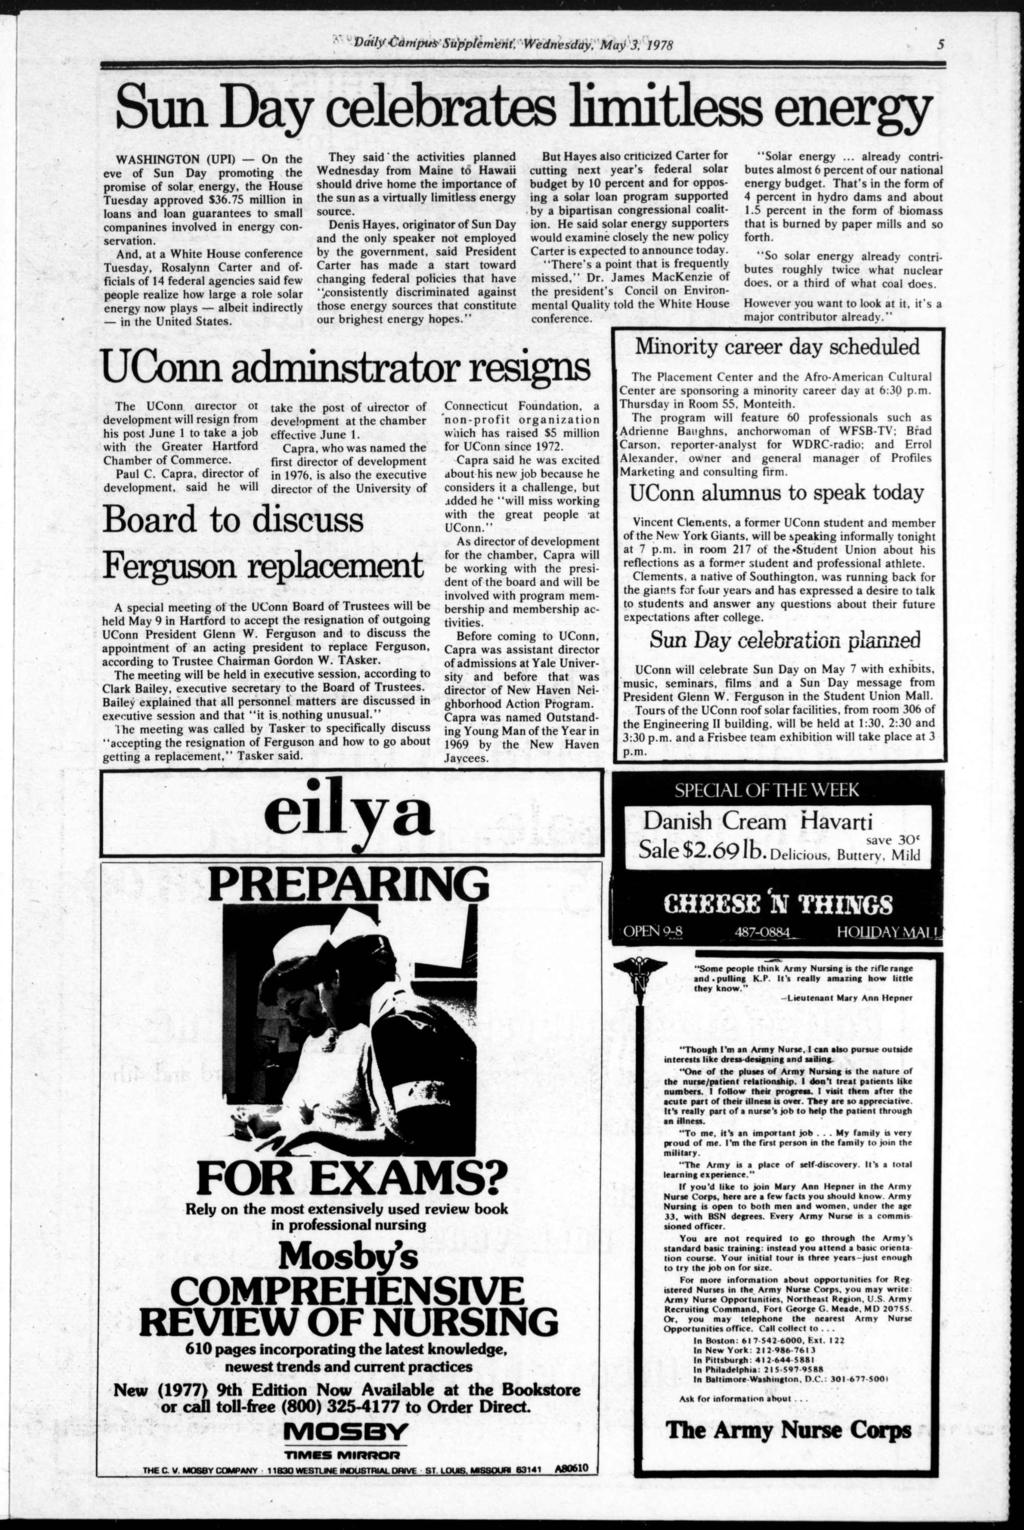 Daly-Campus Supplement'. Wednesday, May>3. 1978 Sun Day celebrates lmtless energy WASHNGTON (UP) On the eve of Sun Day promotng the promse of solar energy, the House Tuesday approved $36.